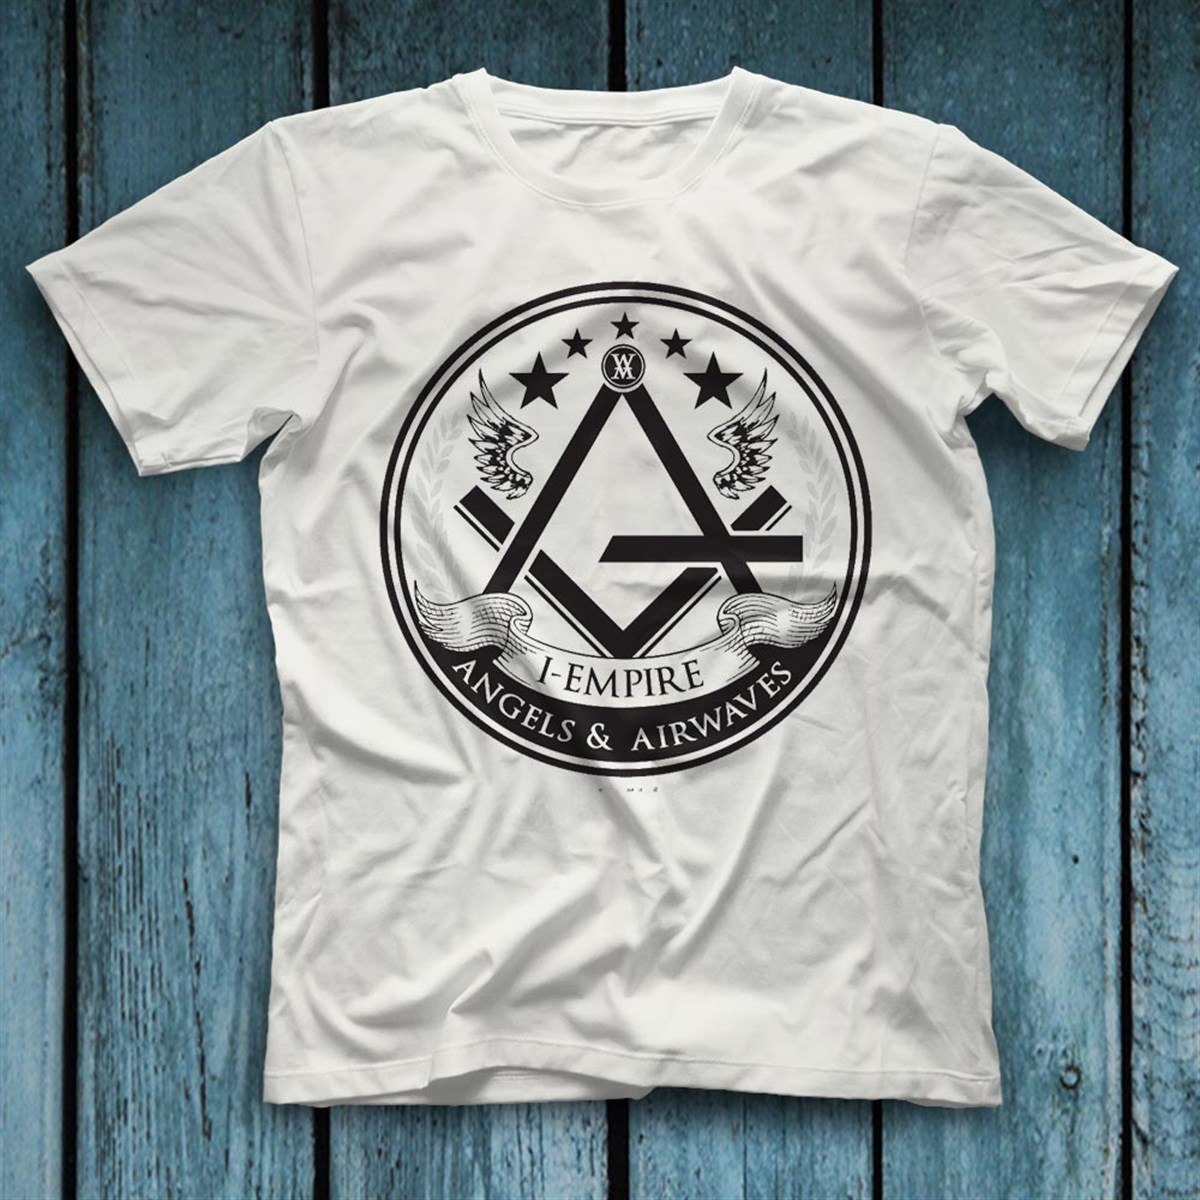 Angels and Airwaves White Unisex T-Shirt - Tees - Shirts